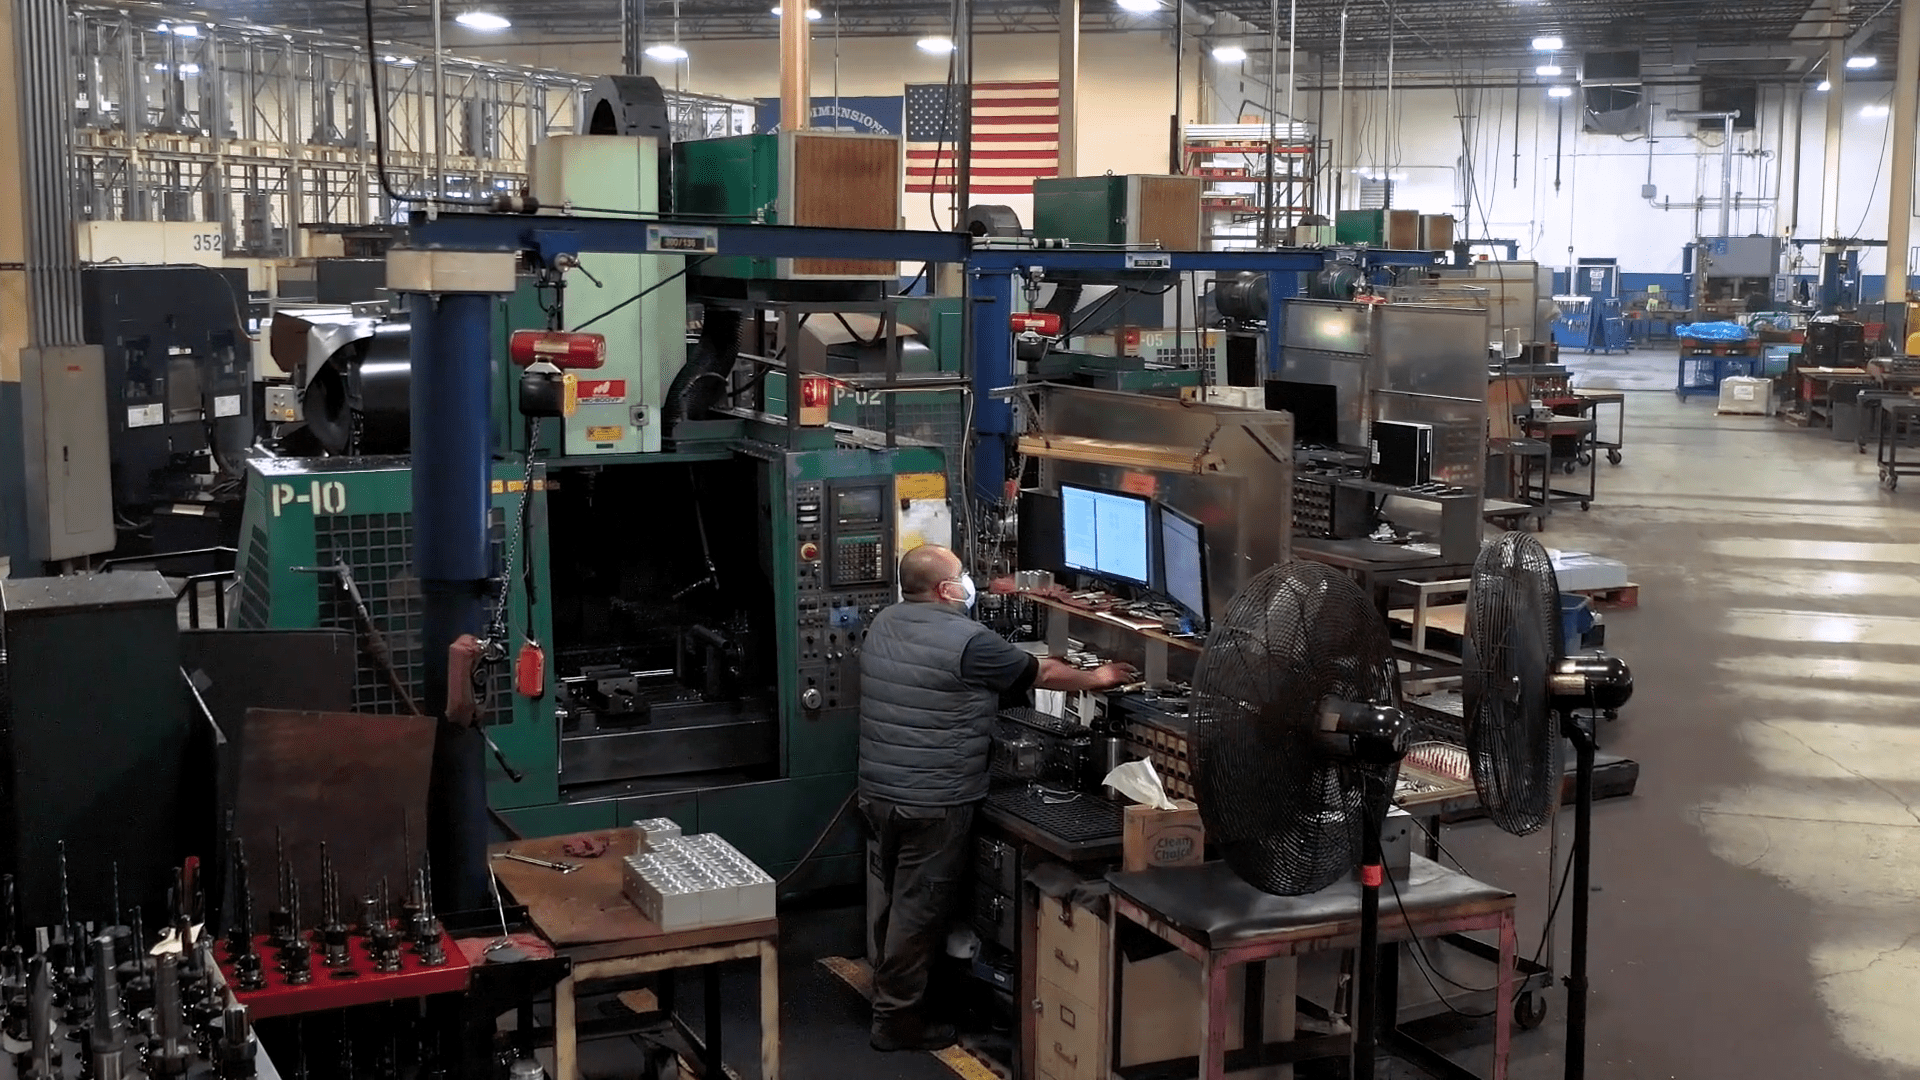 CNC Prototyping is just one of the many services offered by New Dimensions